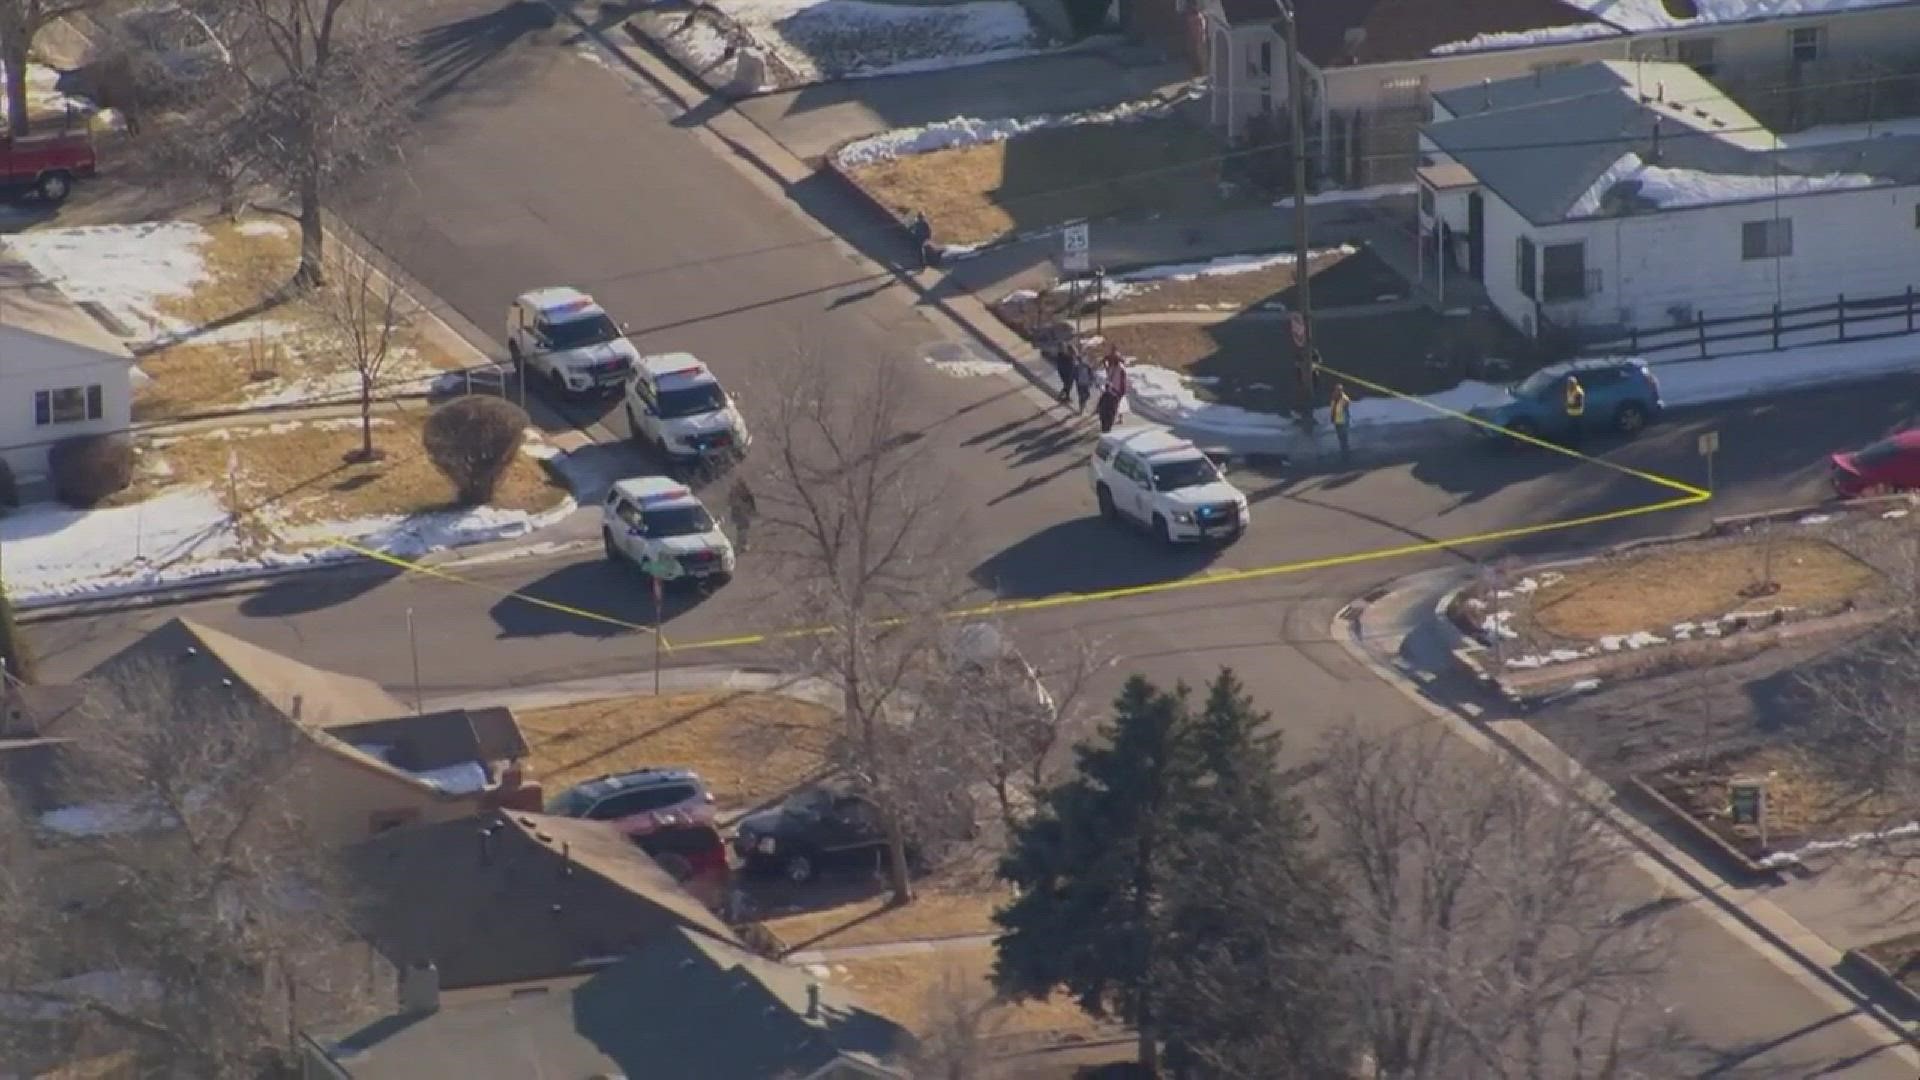 Denver police are on the scene of an officer-involved shooting in south Denver Friday evening, according to the Denver Police Department. No officers were injured.